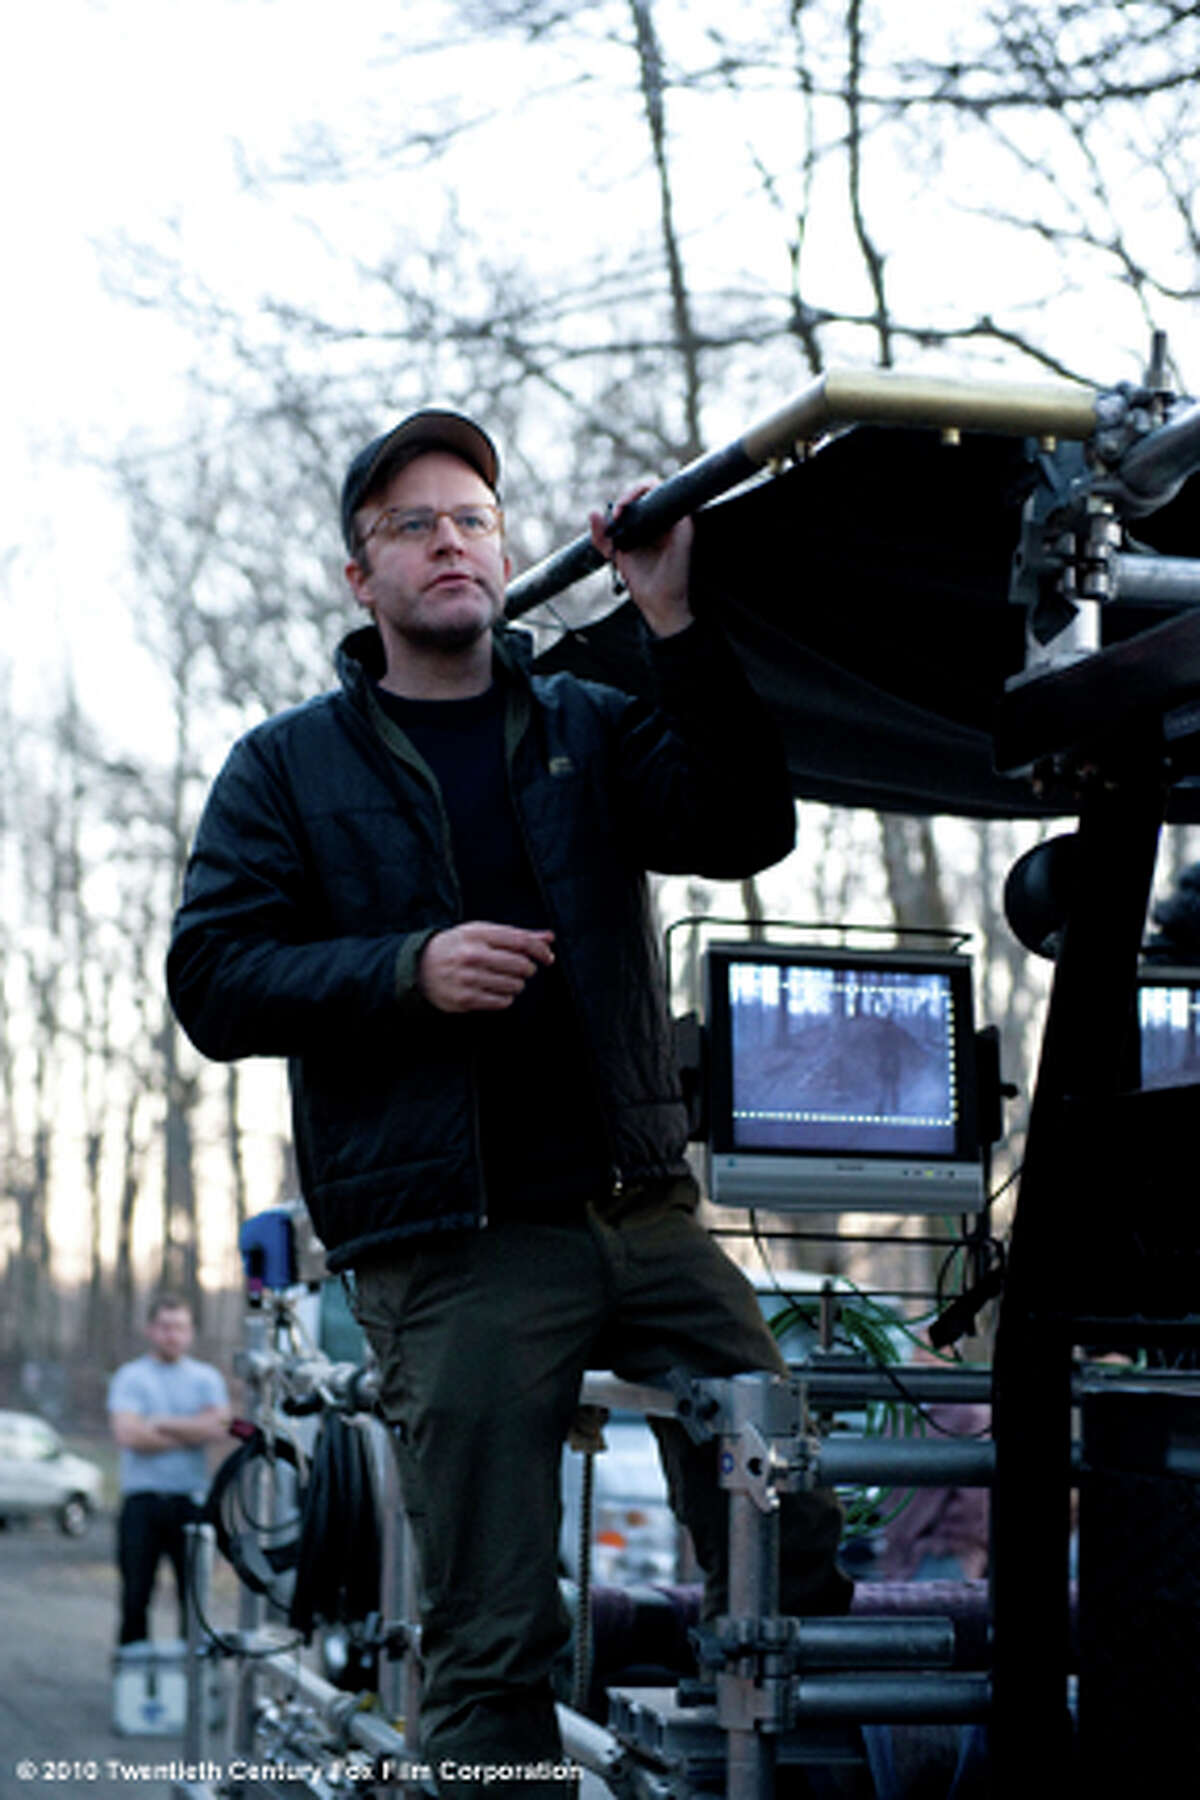 Director Tom McCarthy on the set of "Win WIn."